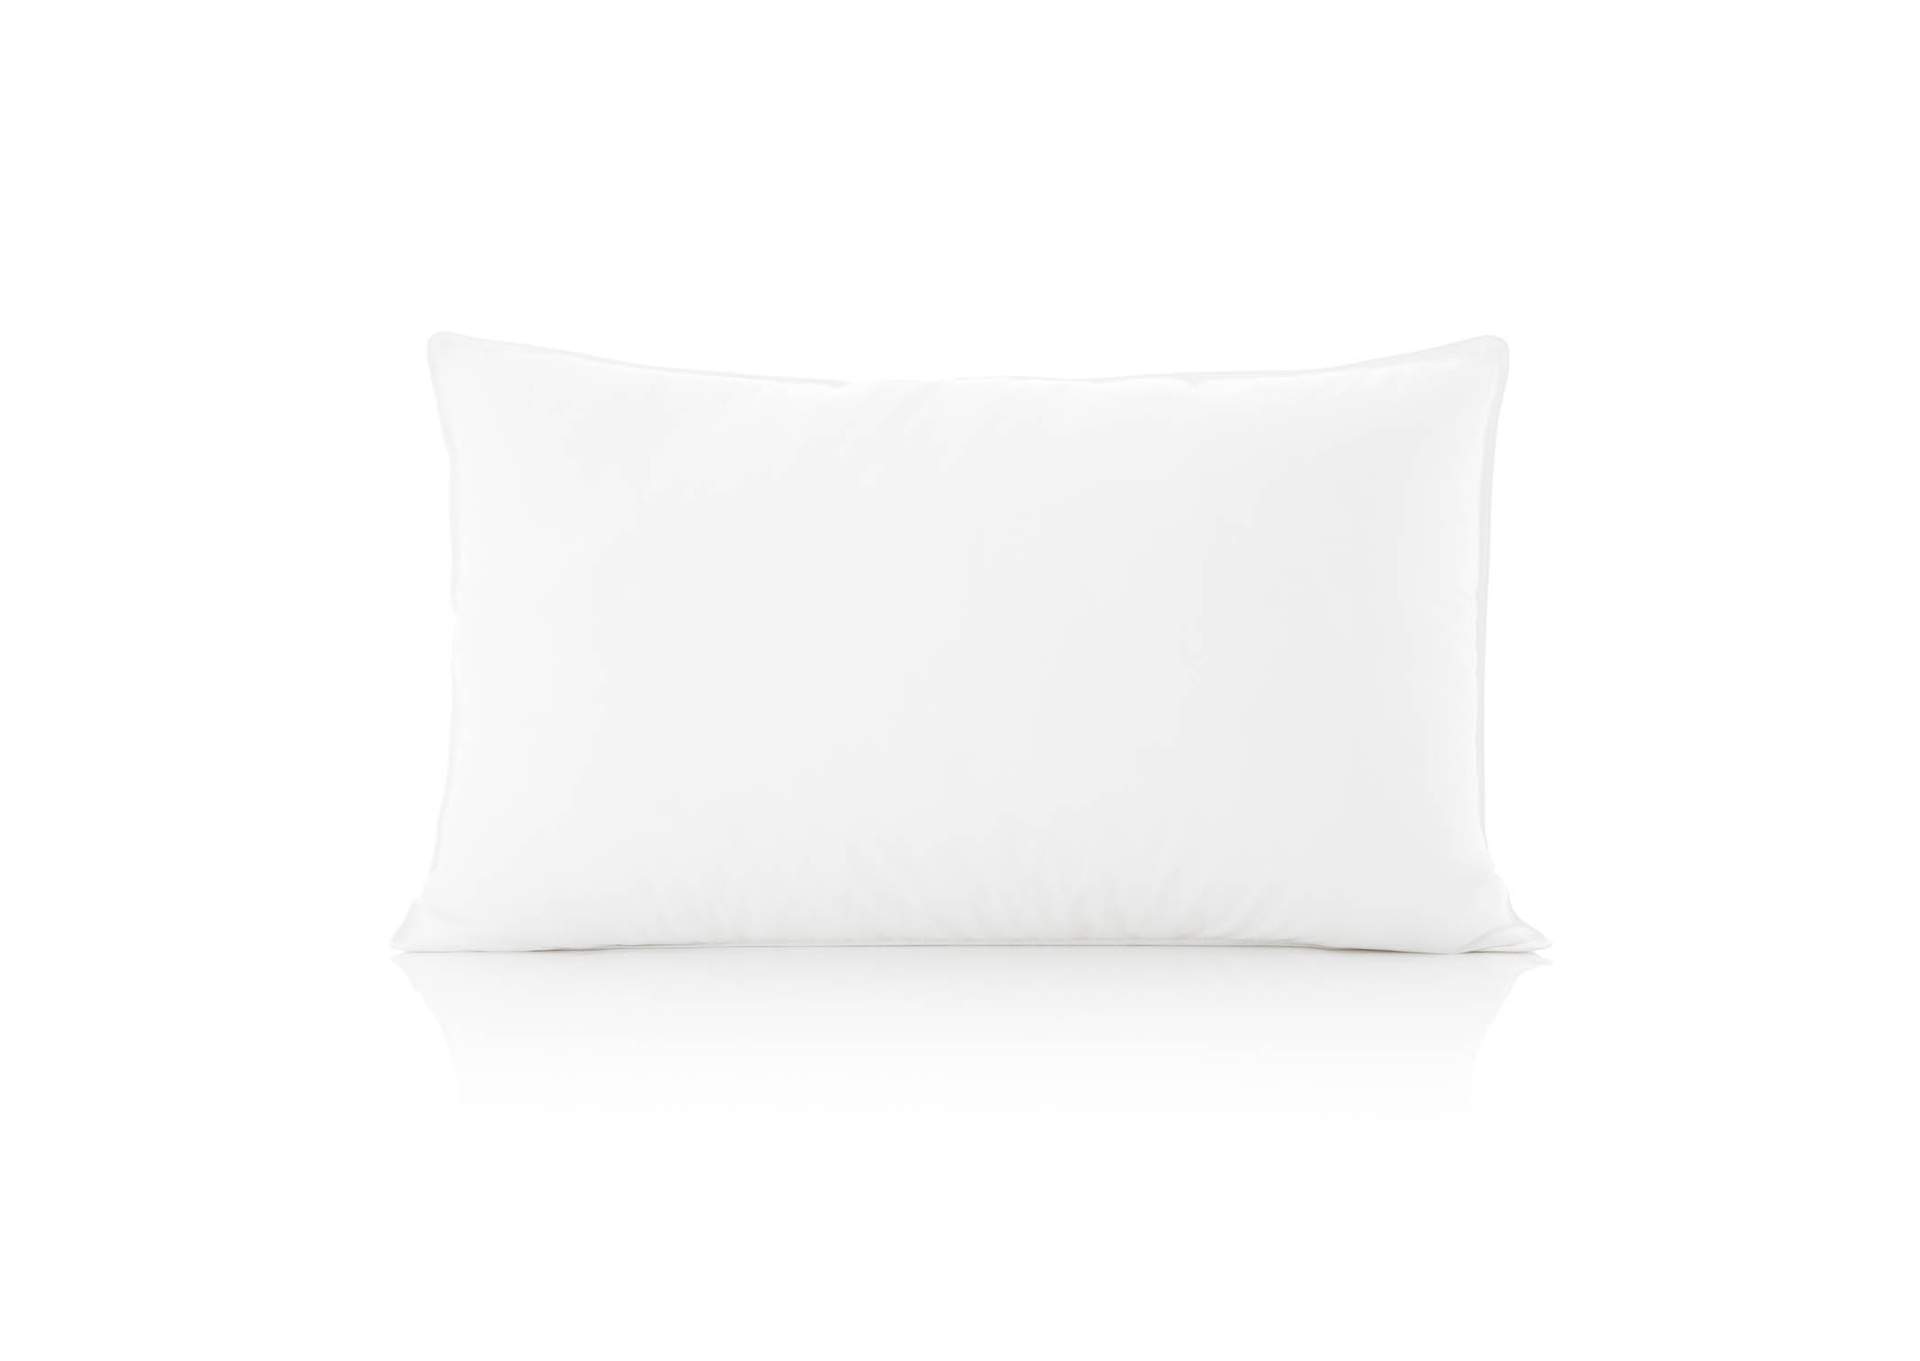 Malouf Compressed -1-Pack Pillow - King Size,Malouf